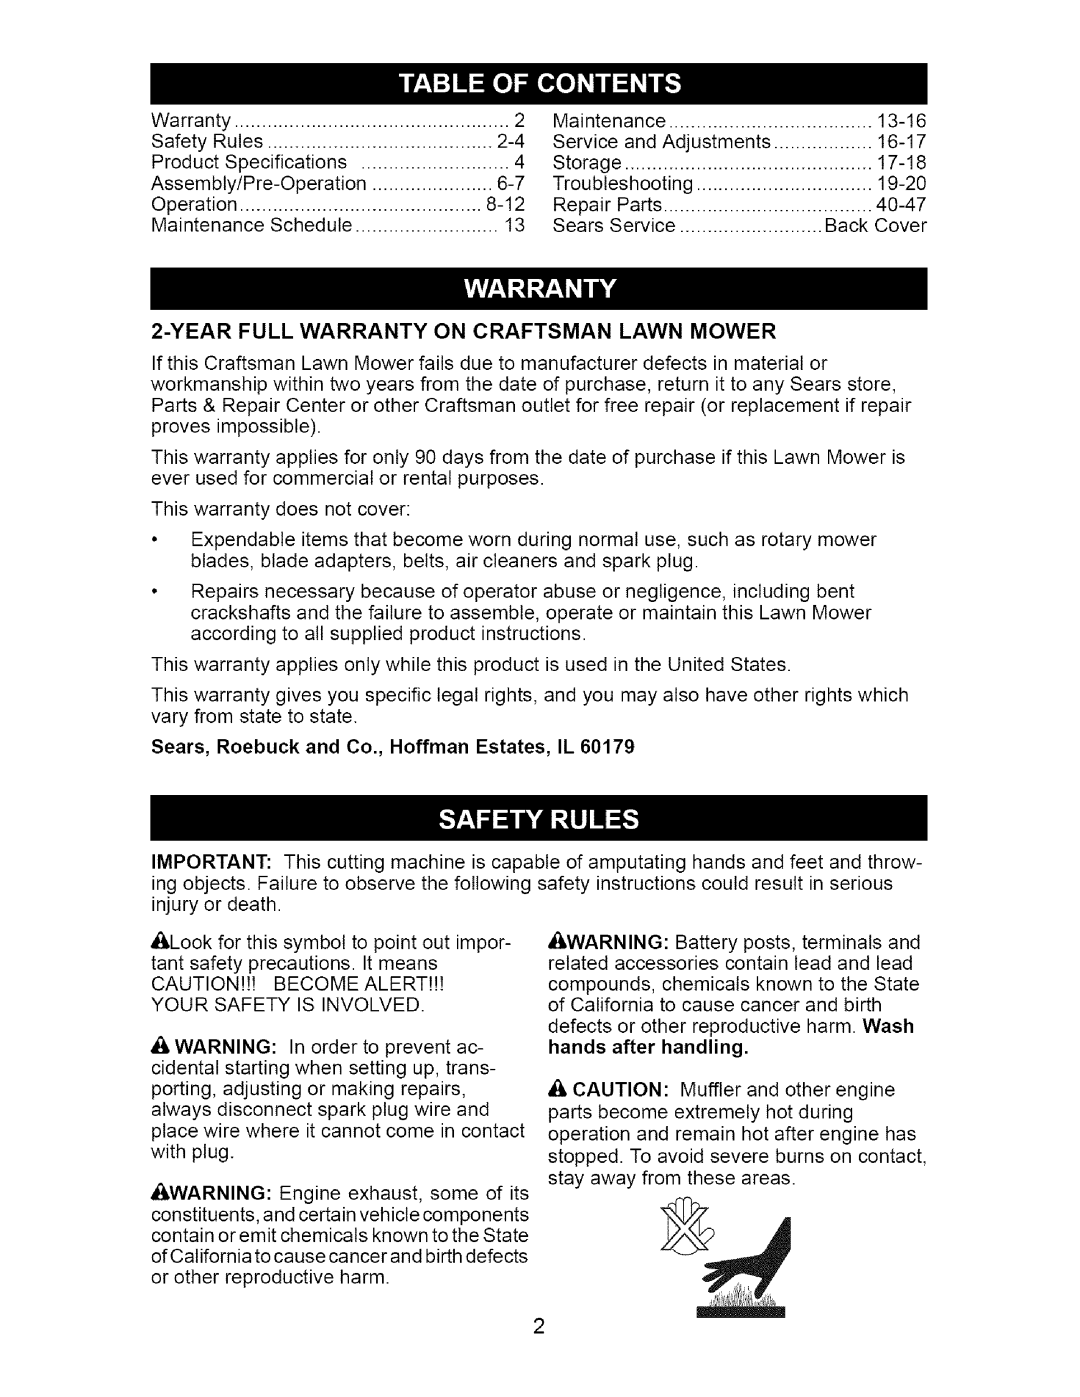 Craftsman 917.370741 owner manual Yearfull Warranty On Craftsman Lawn Mower, Sears, Roebuck and Co., Hoffman Estates, IL 